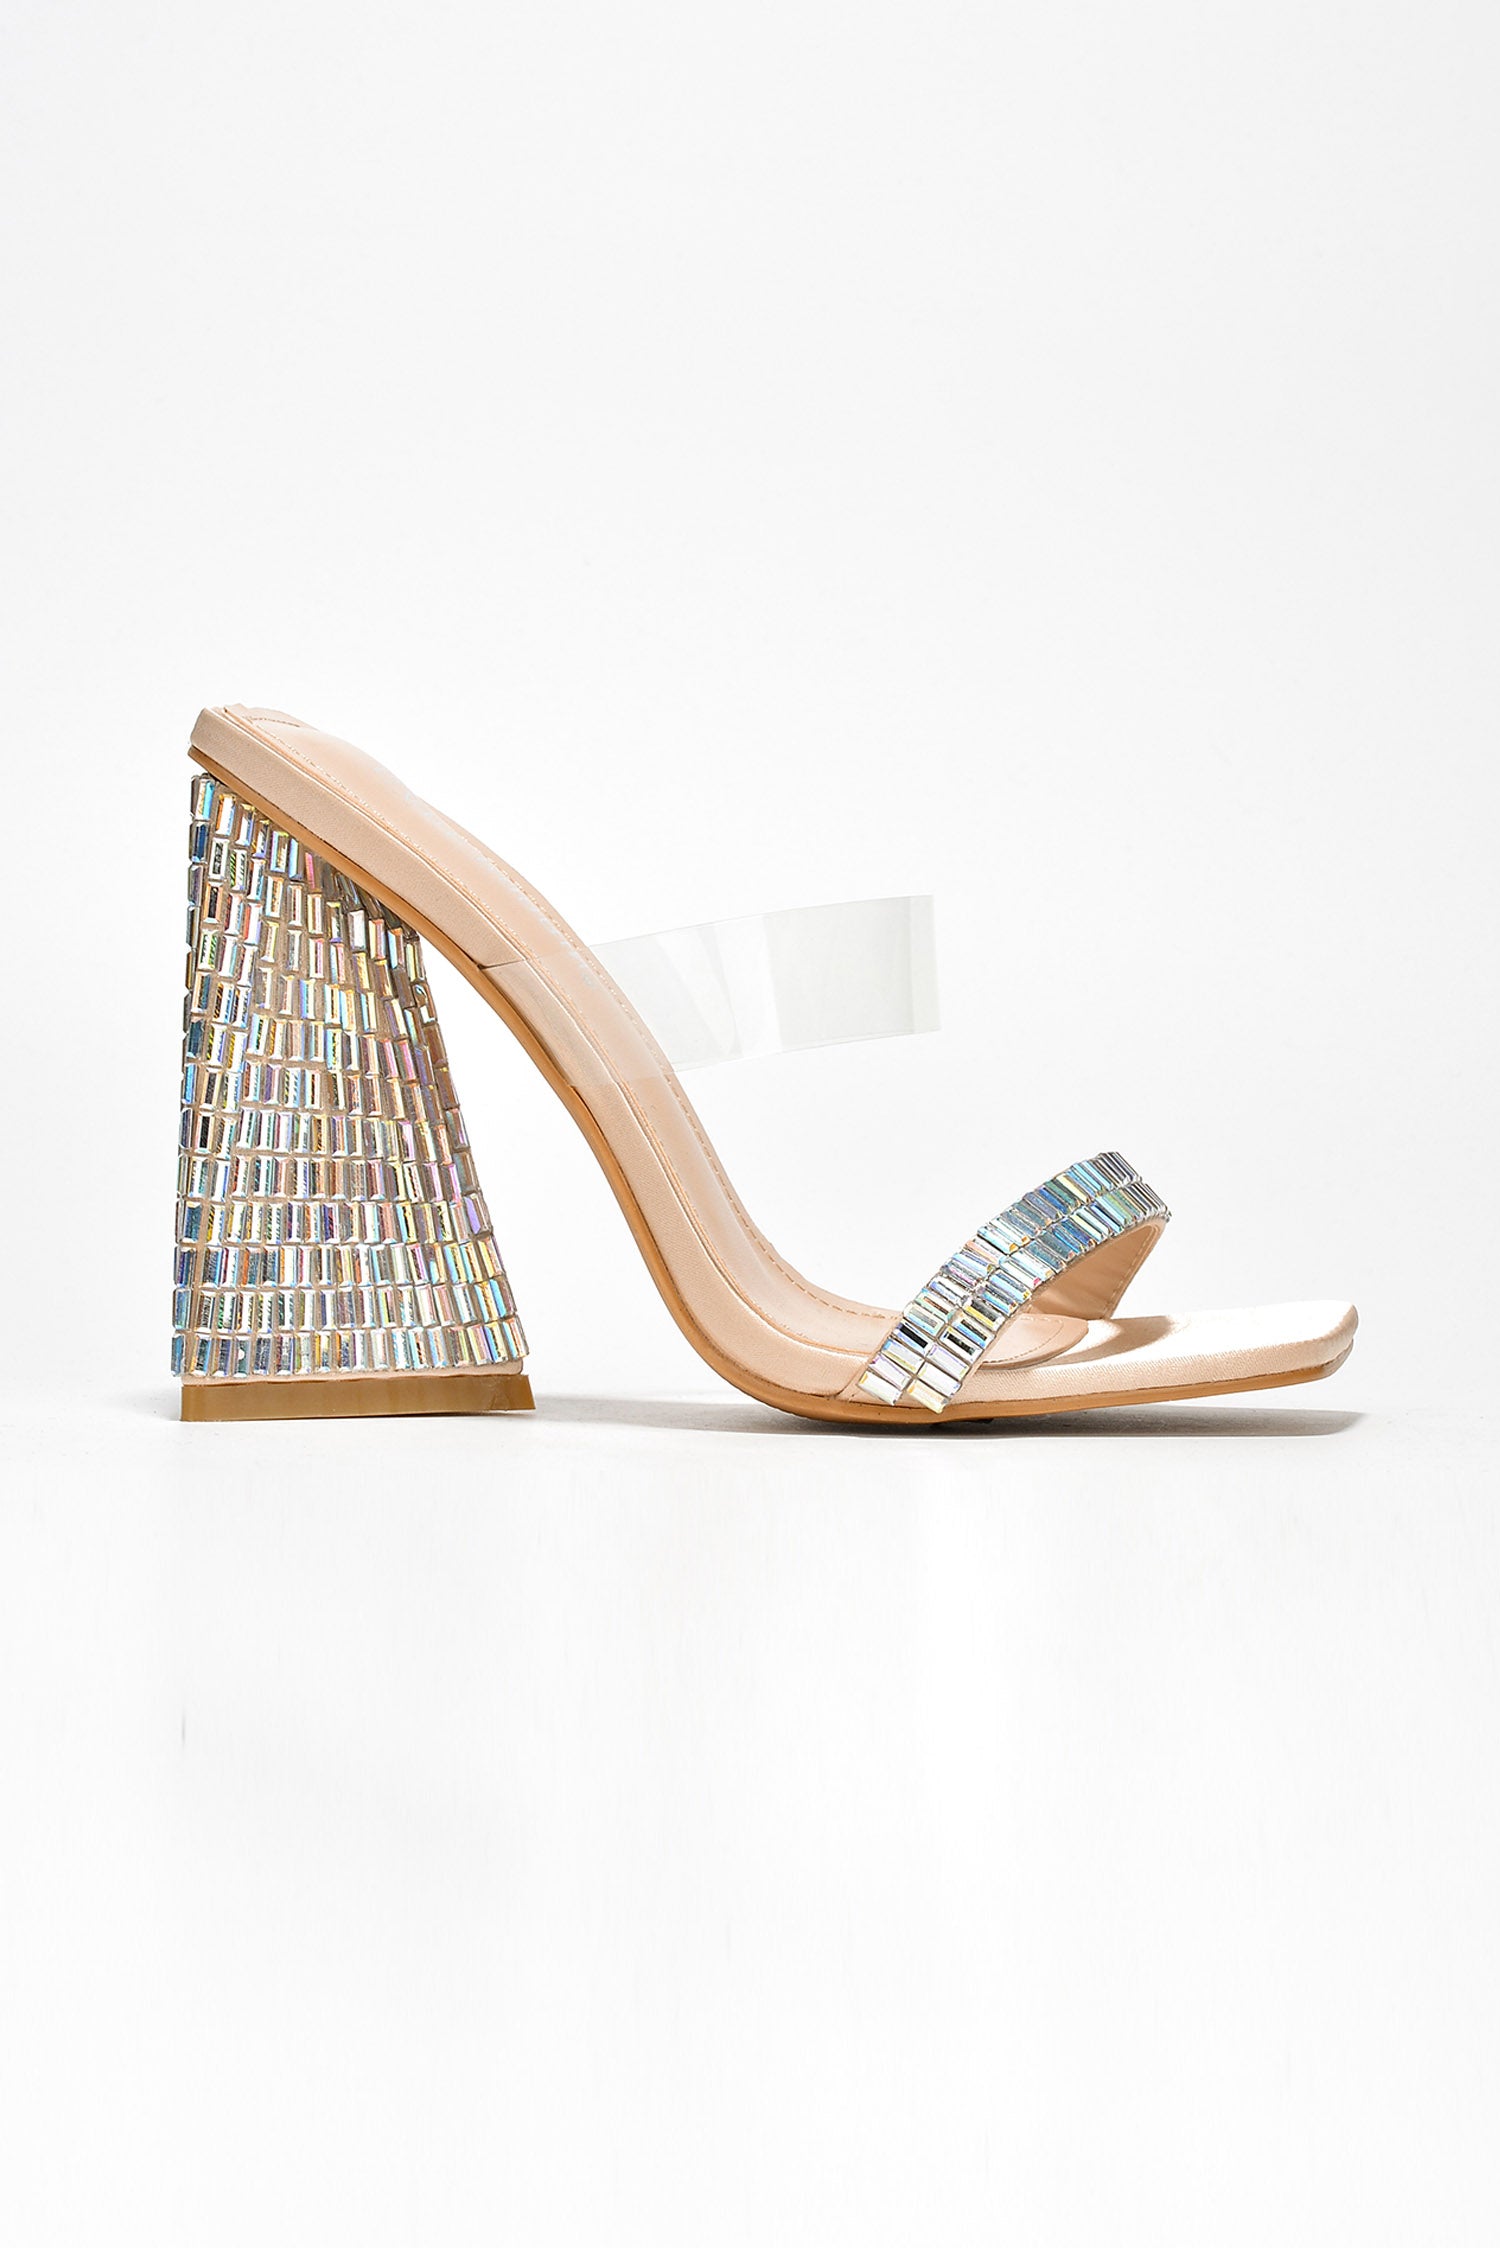 UrbanOG - Milus Open Toe Block Heels with added Clear Upper Strap and Mirr - HEELS